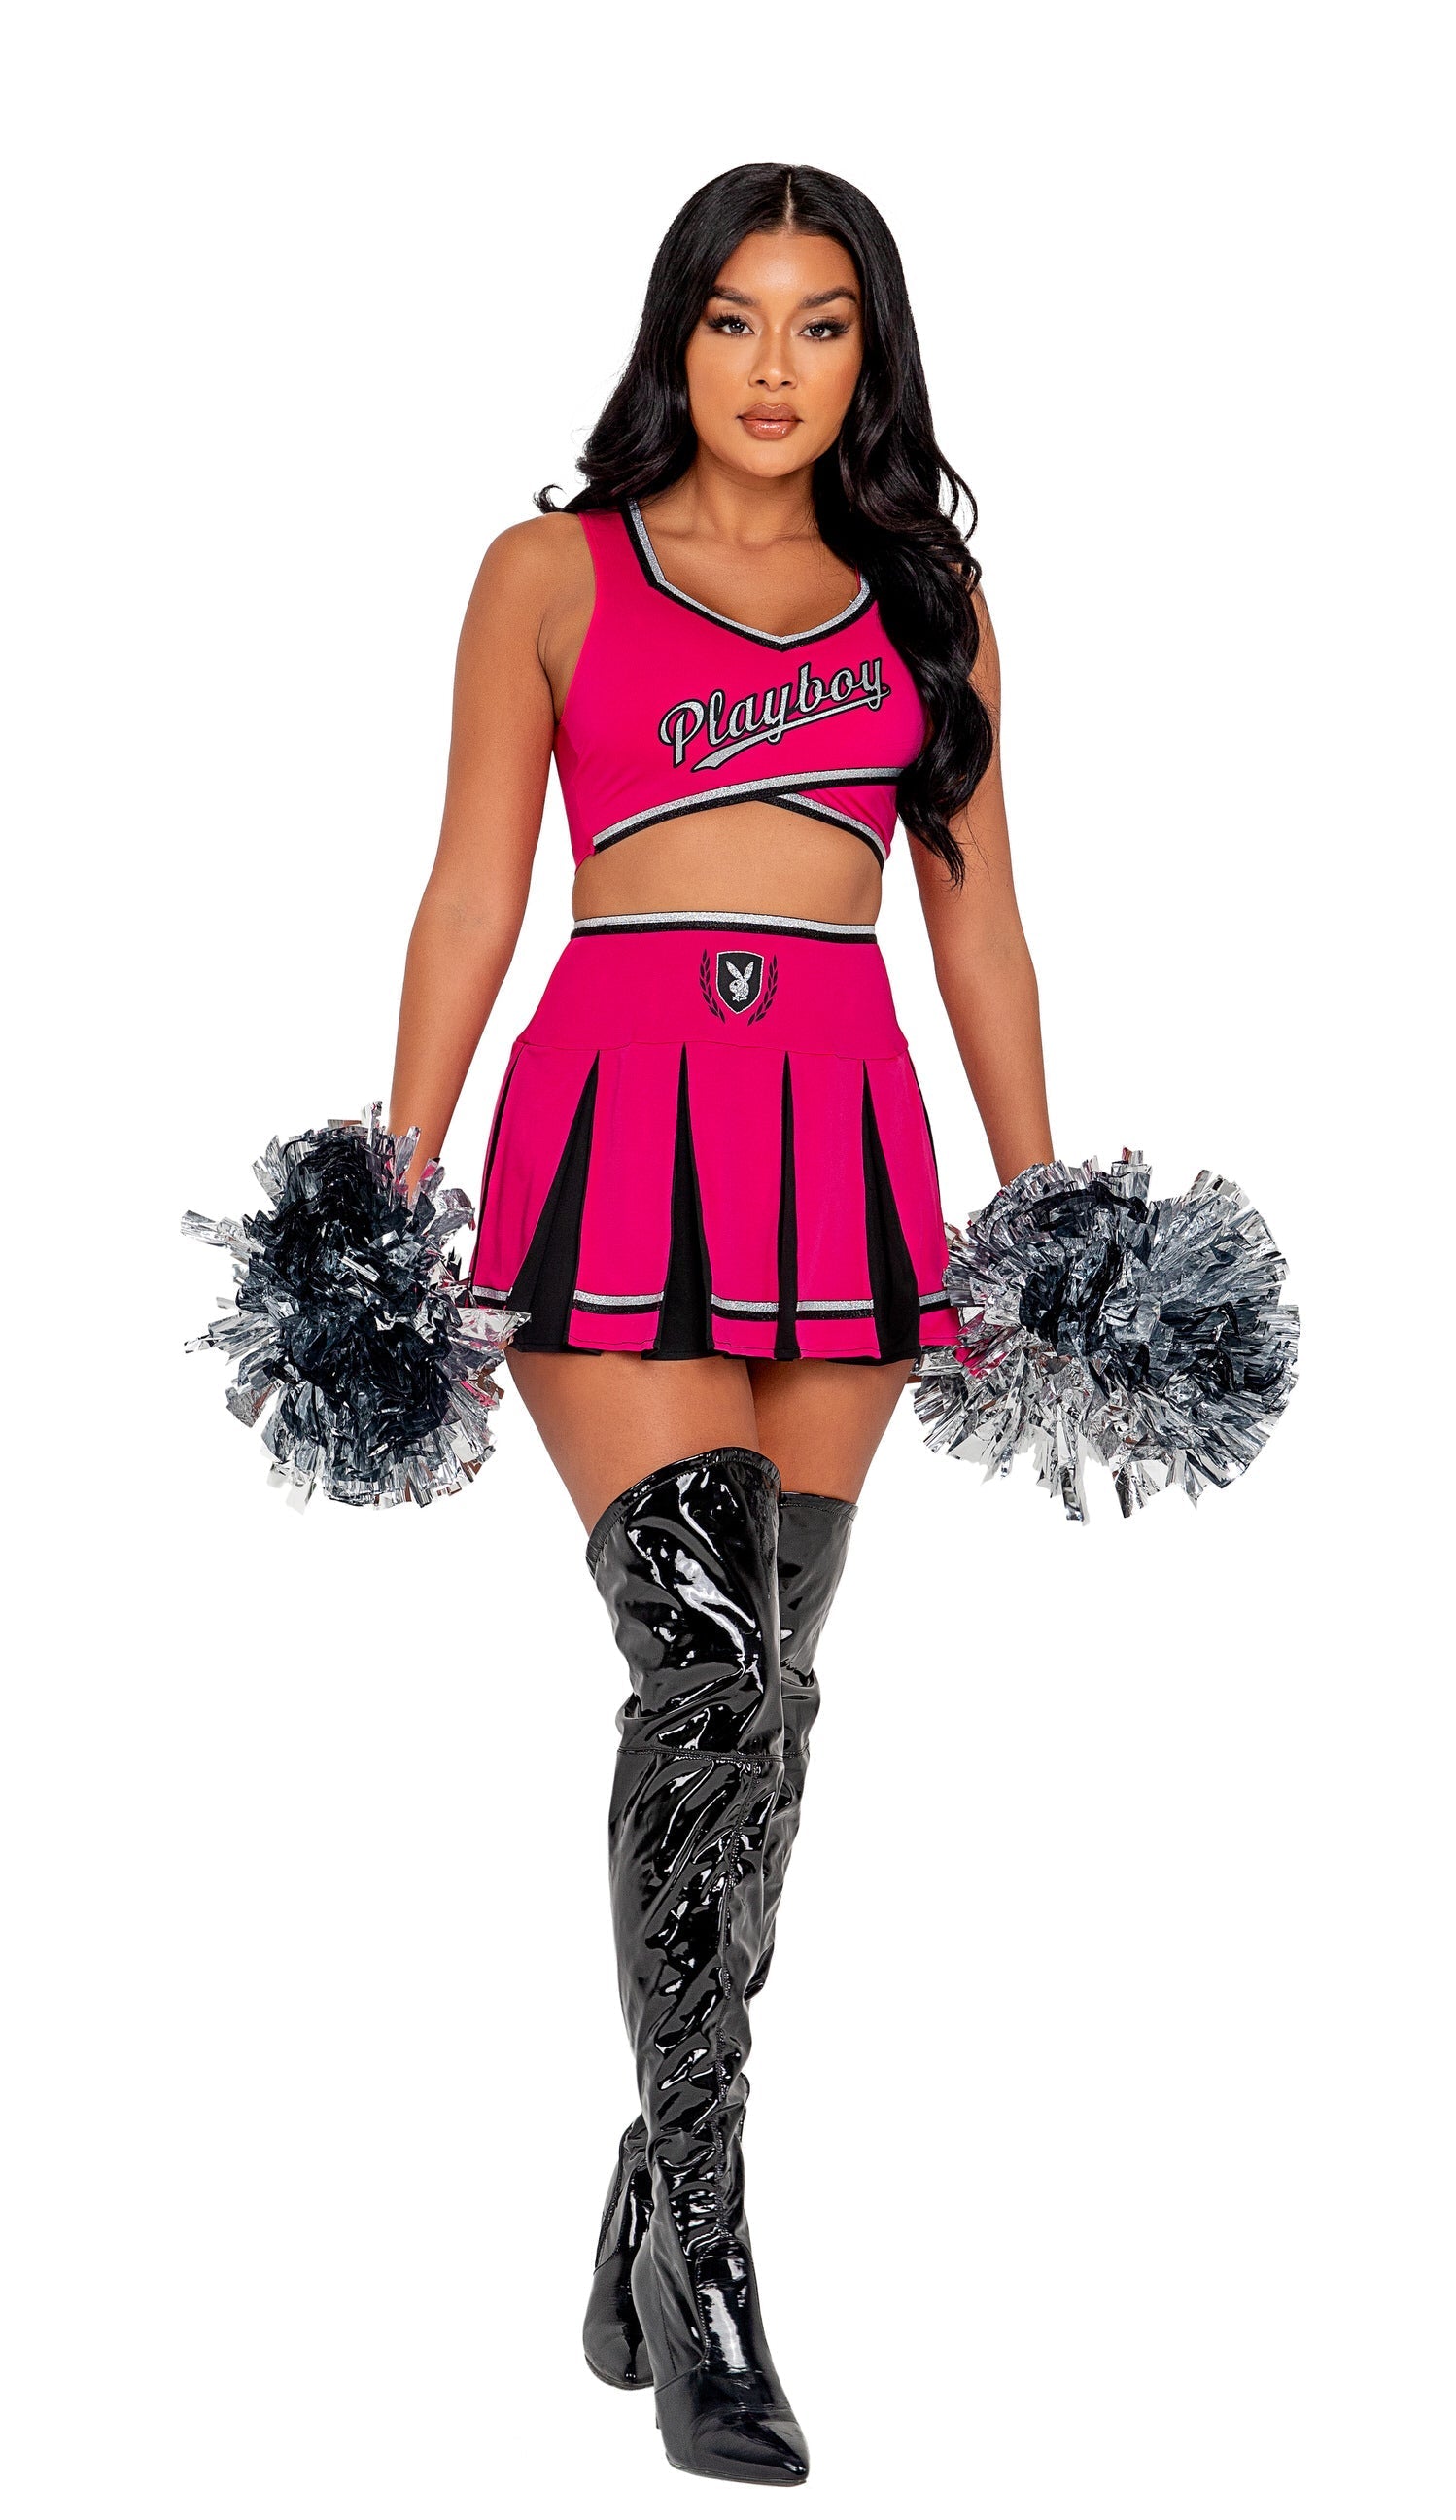 Women's Cheerleader Costume: Showstopping Playboy Cheer Squad 3pcs Set